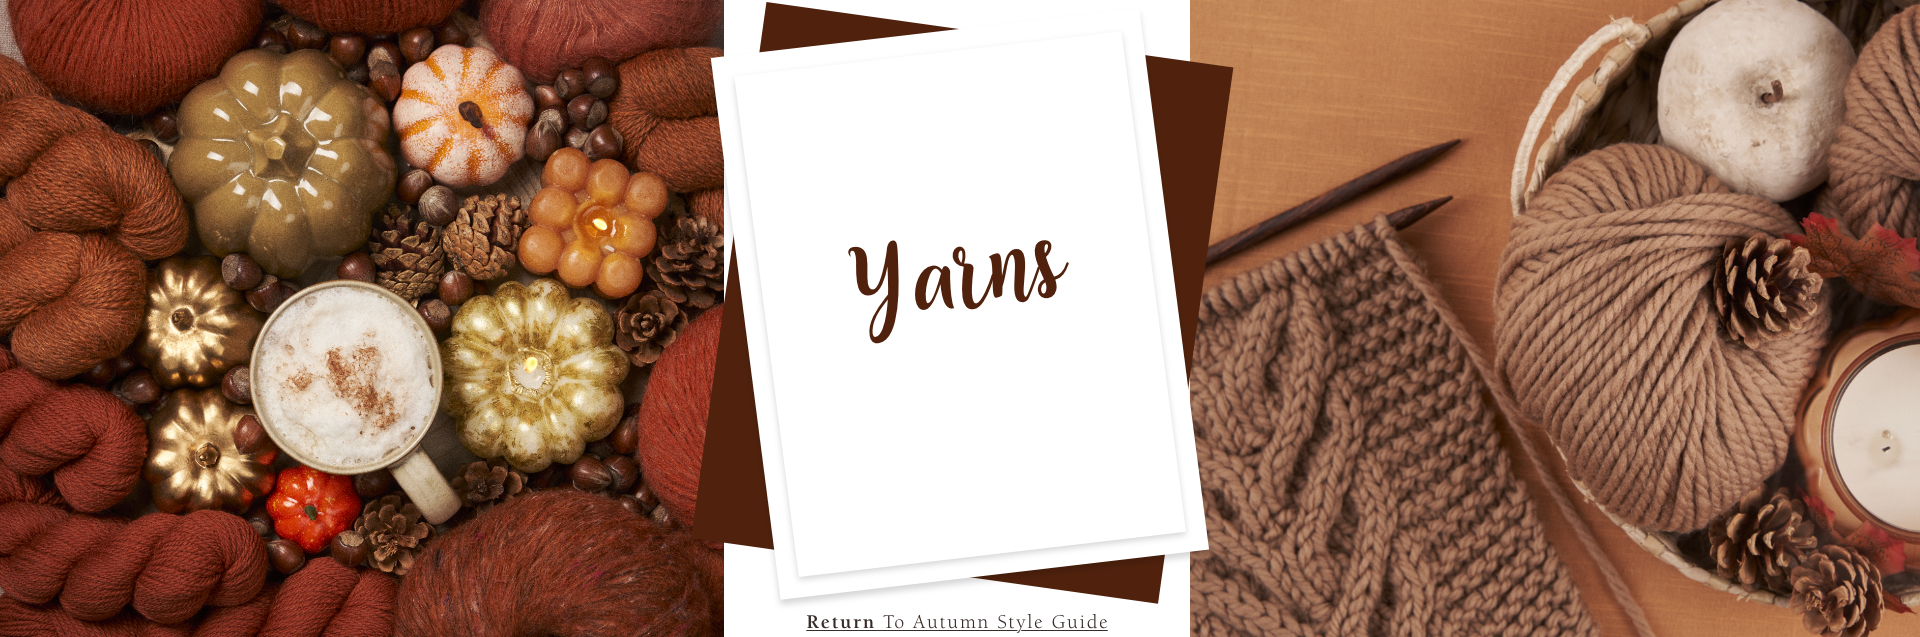 Autumn Style Guide Yarns